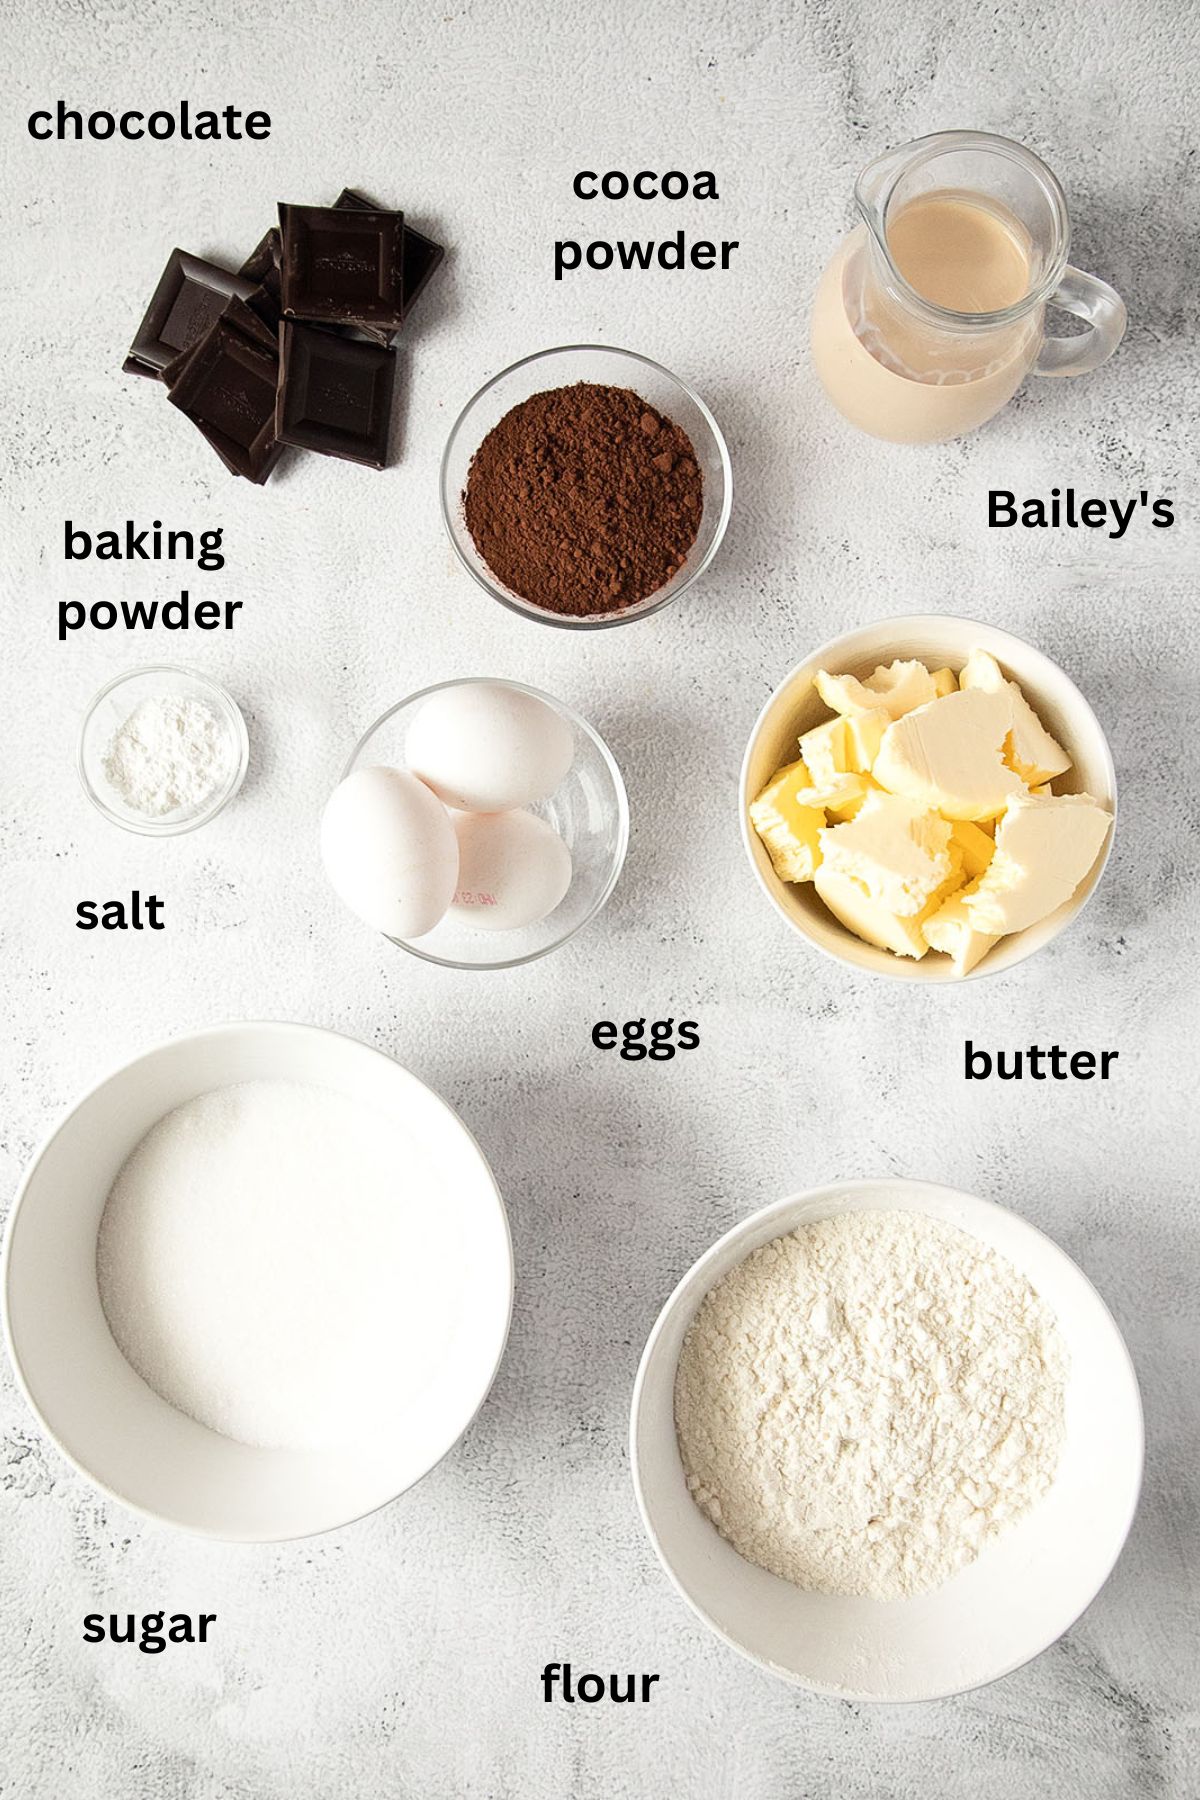 listed ingredients for making cake with chocolate, bailey's and chocolate glaze.